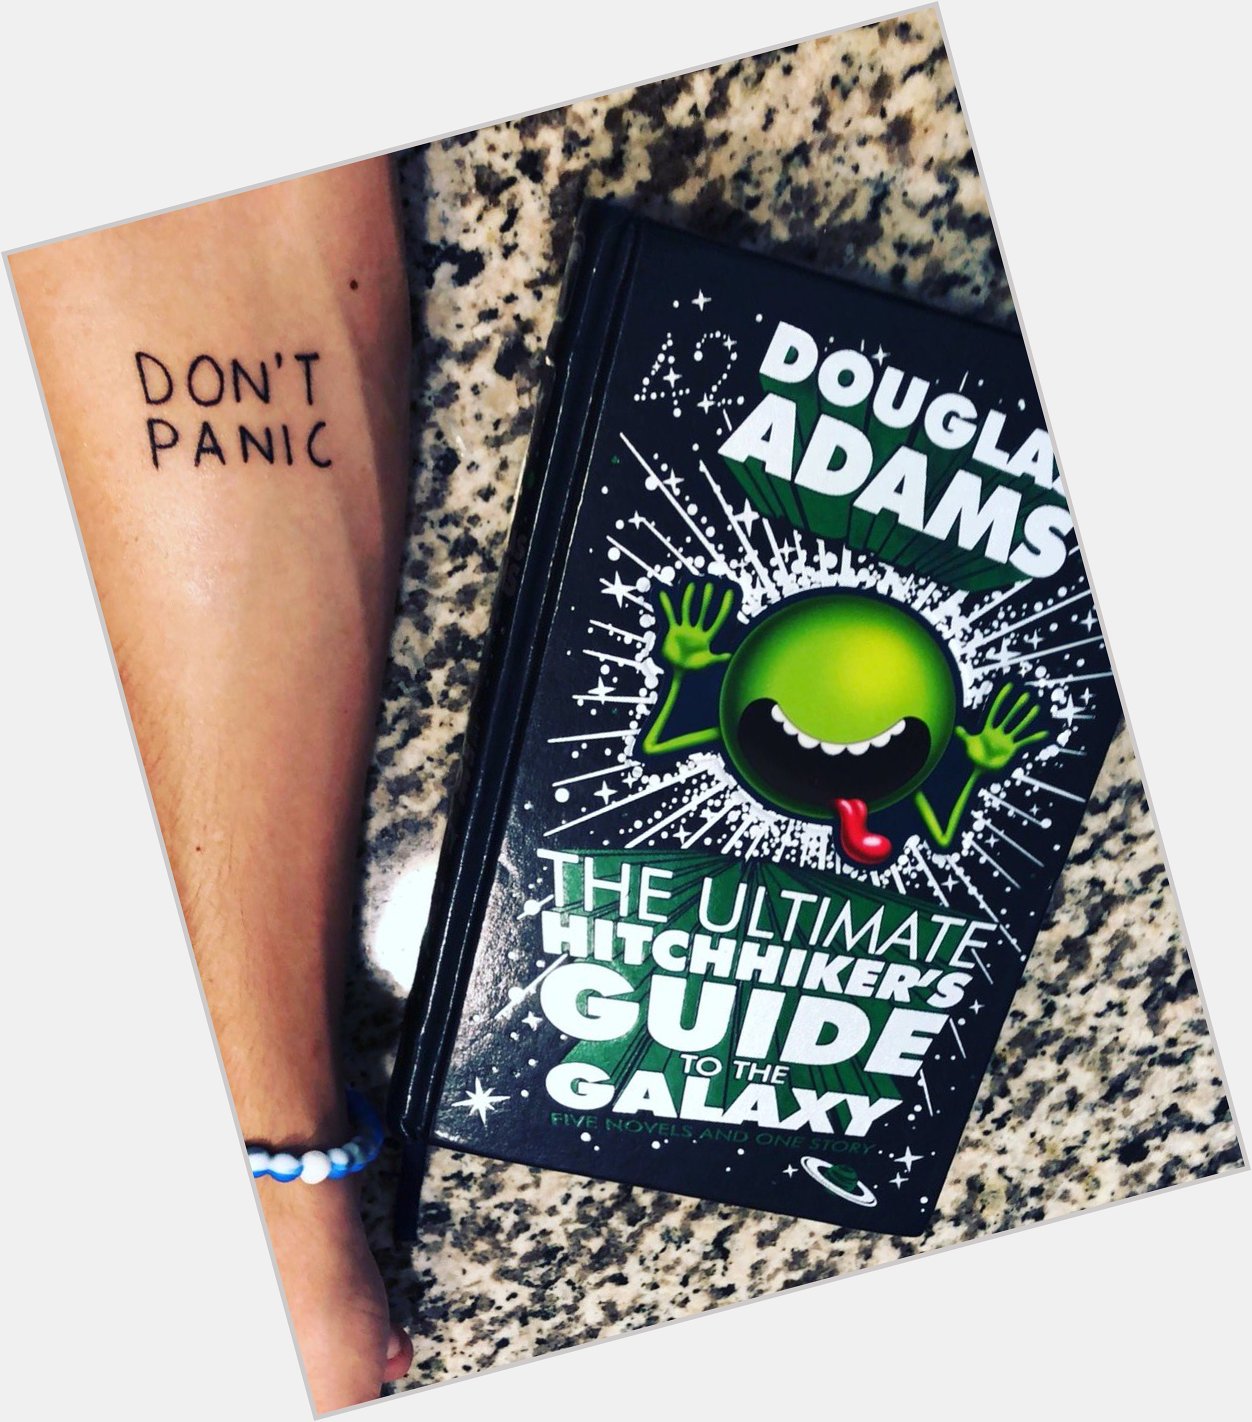 Happy would-be birthday to the GOAT, Douglas Adams! 